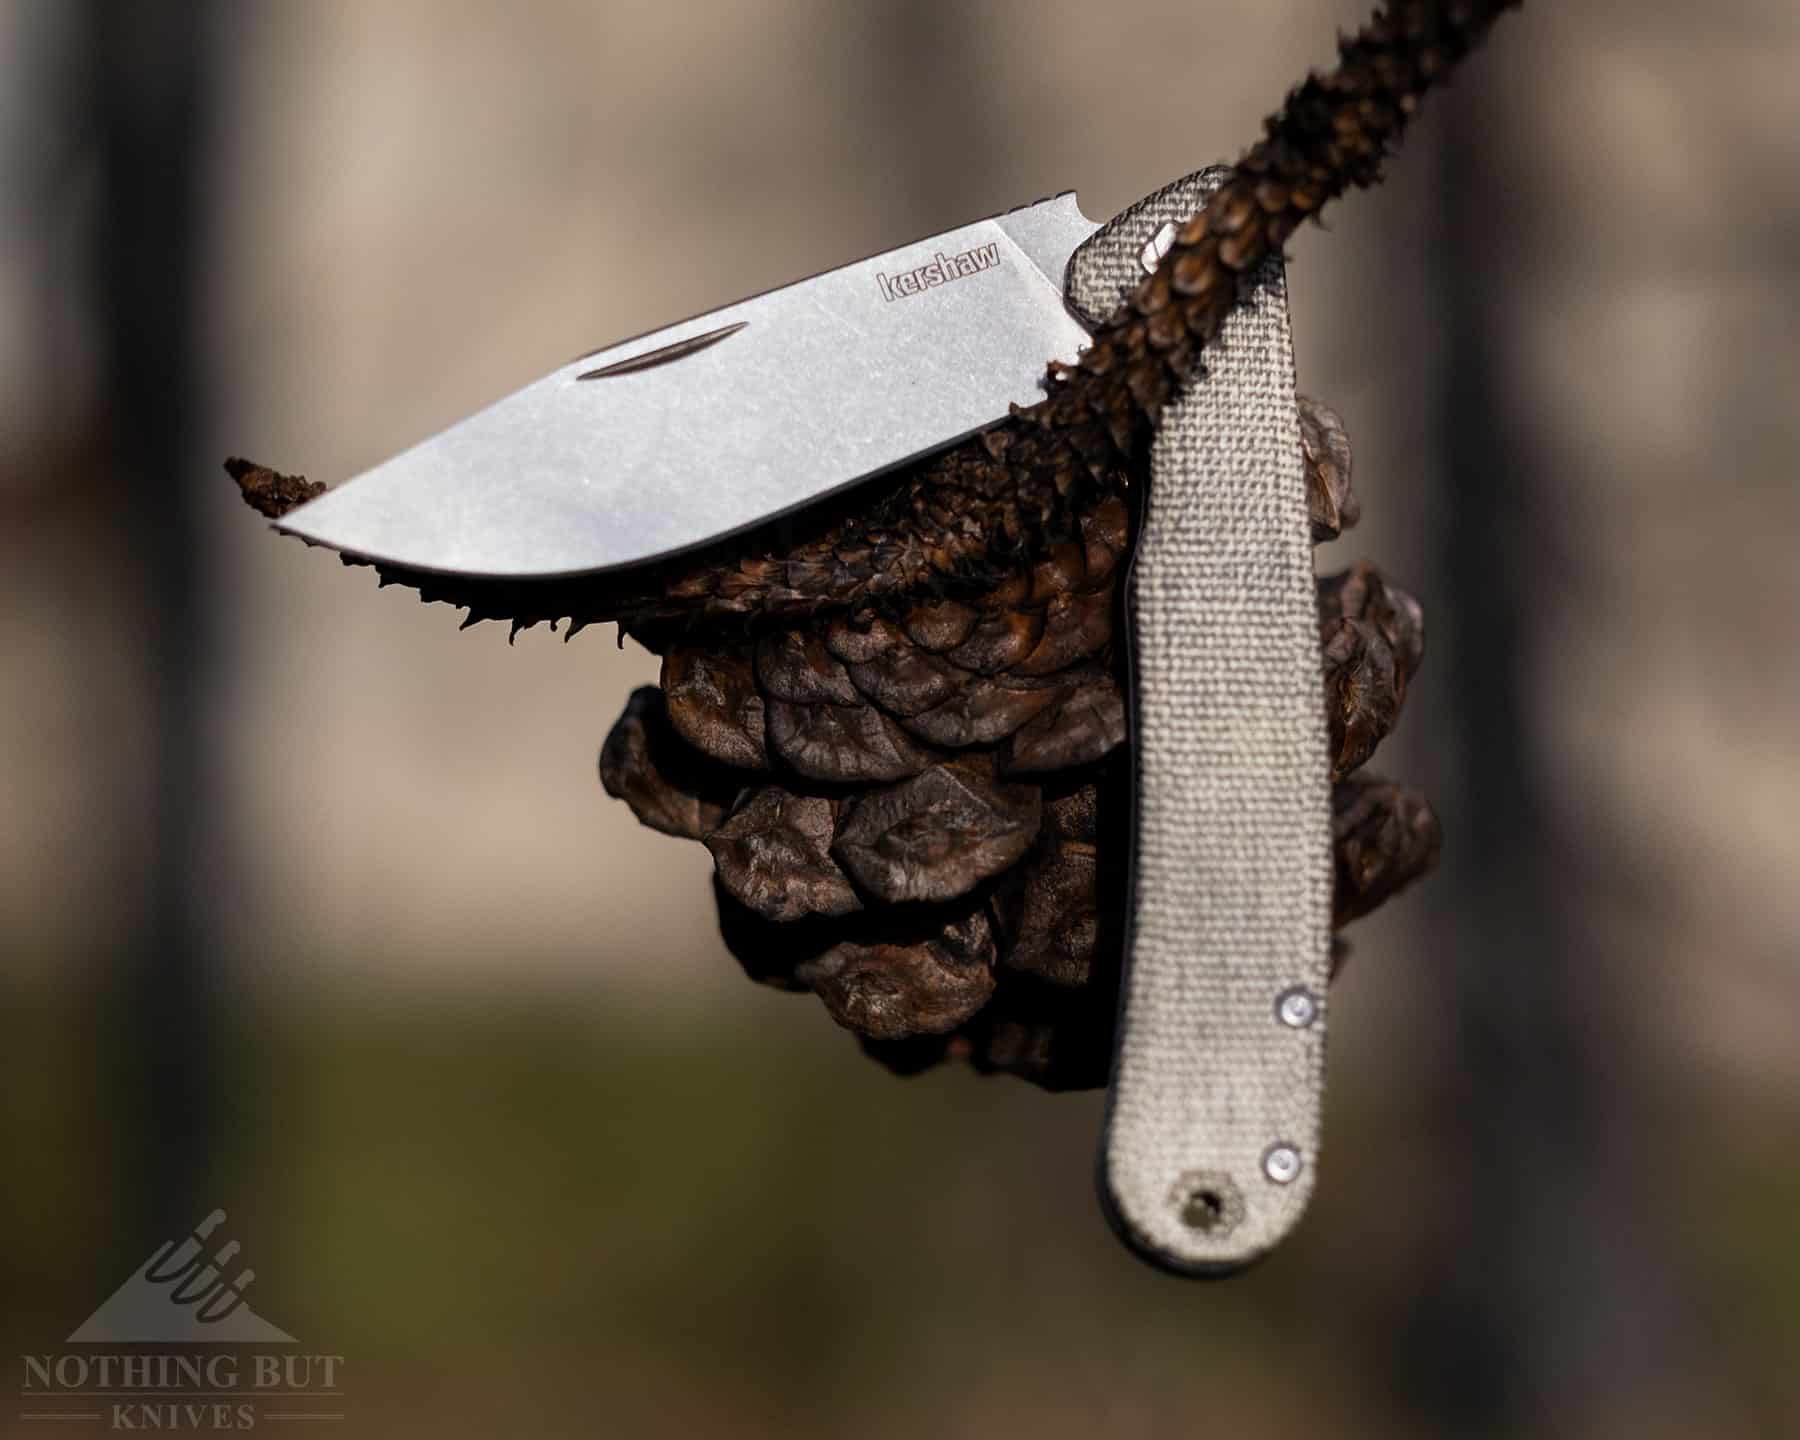 The Kershaw Federalist slipjoint knife in the half open position to show the double detent locking system in use. 